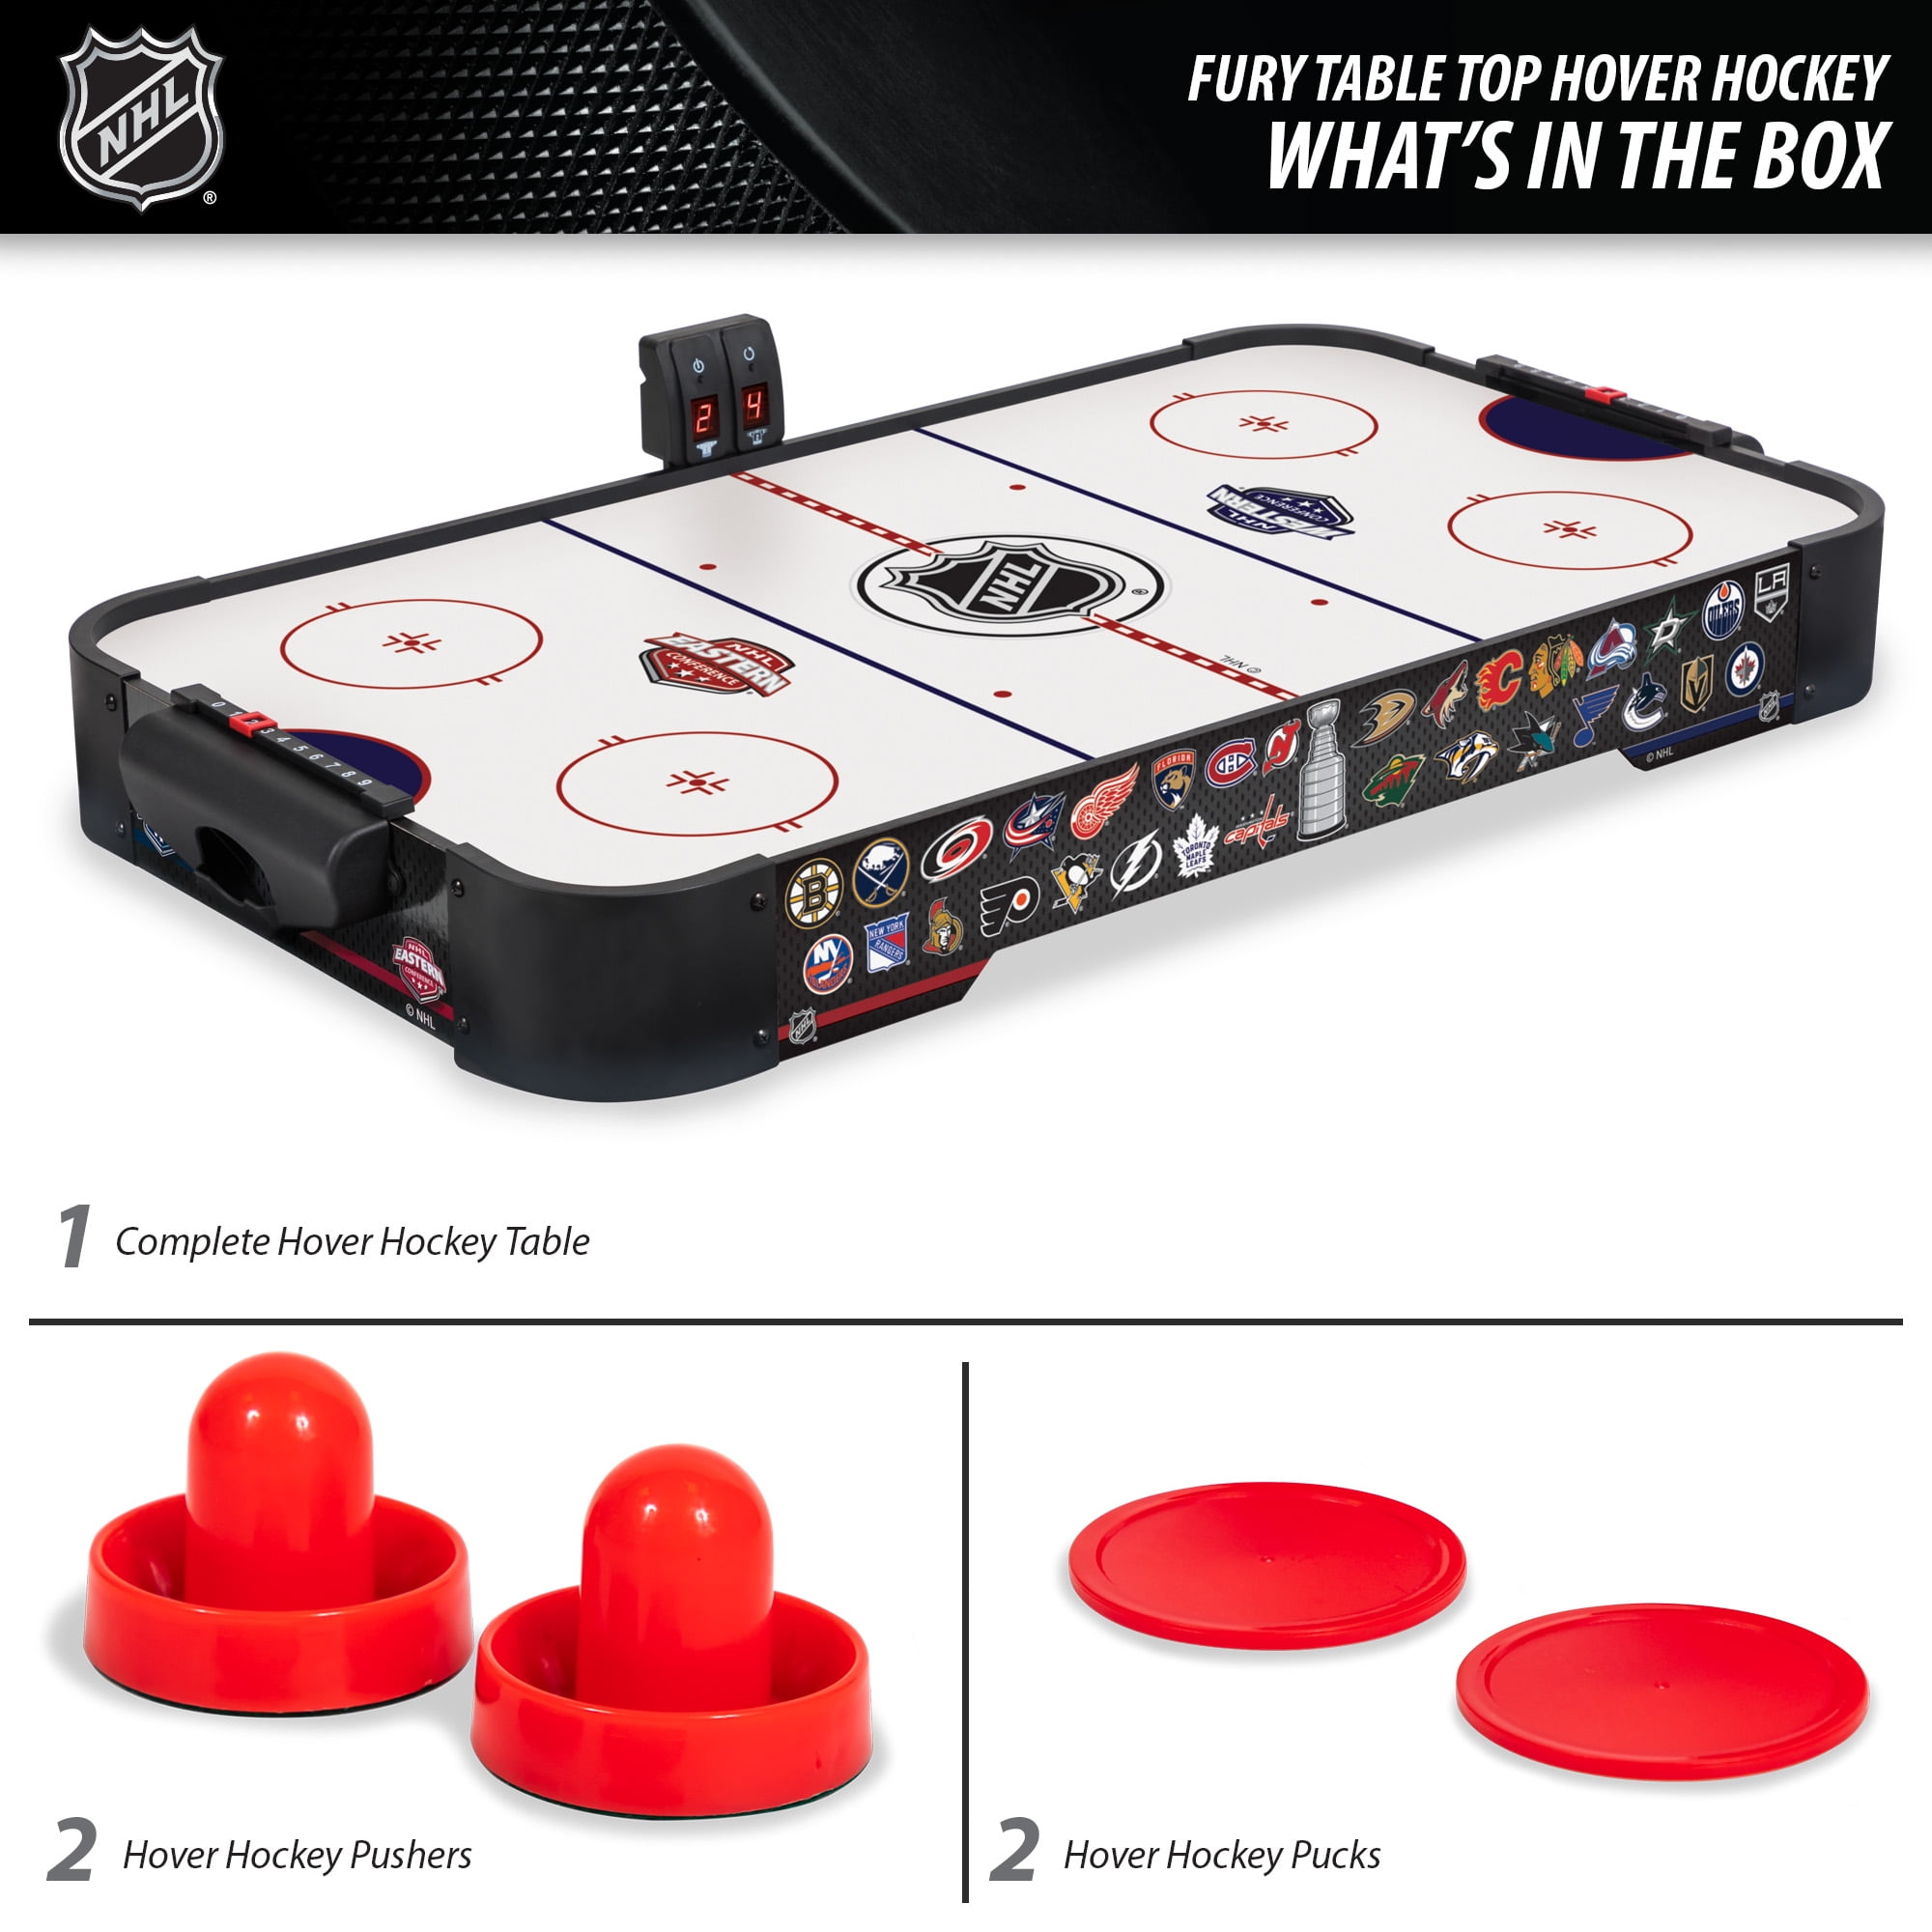 Nhl Fury Table Top Air Powered Hockey Game 38 In Includes Two